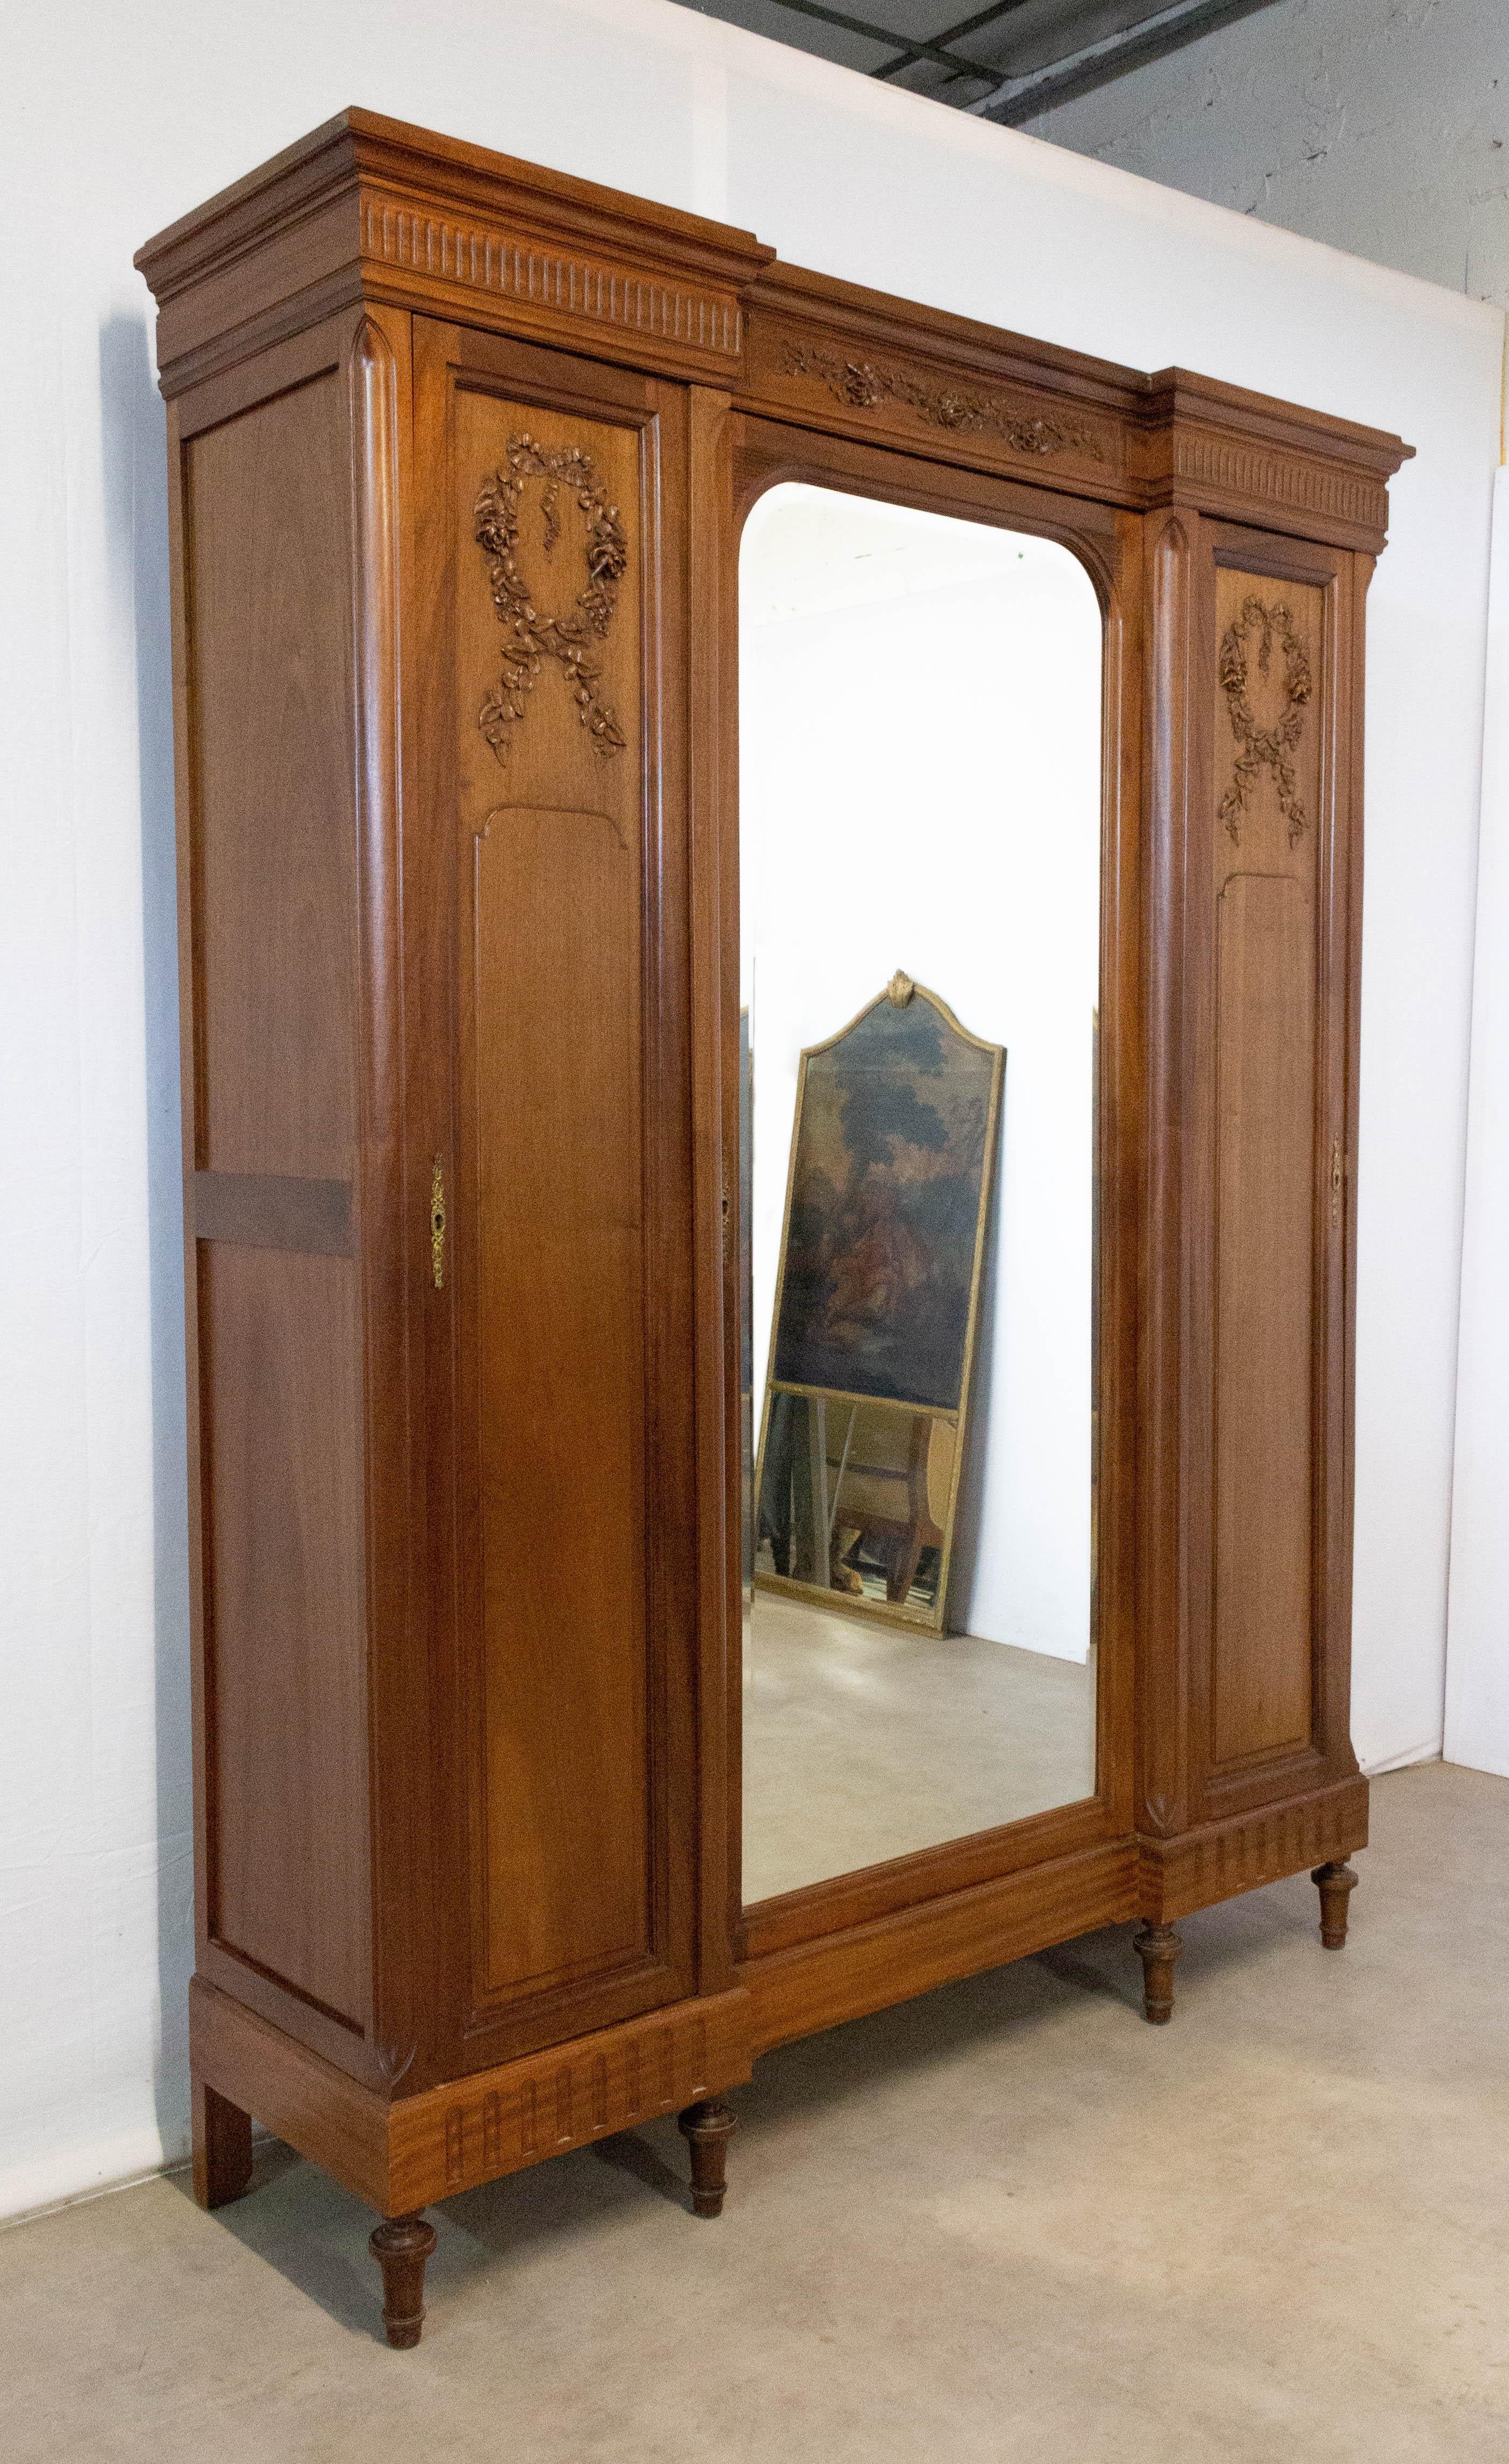 French mirror door wardrobe 1900 Louis XVI style, blond exotic wood armoire
hand carved roses.
Cabinet with two drawers and three doors.
Very good condition.

For shipping:
Pack 1 : 178x46x50cm 32kg
Pack 2 : 82x190x5cm 35kg
Pack 3 : 48x190x50 48kg
  